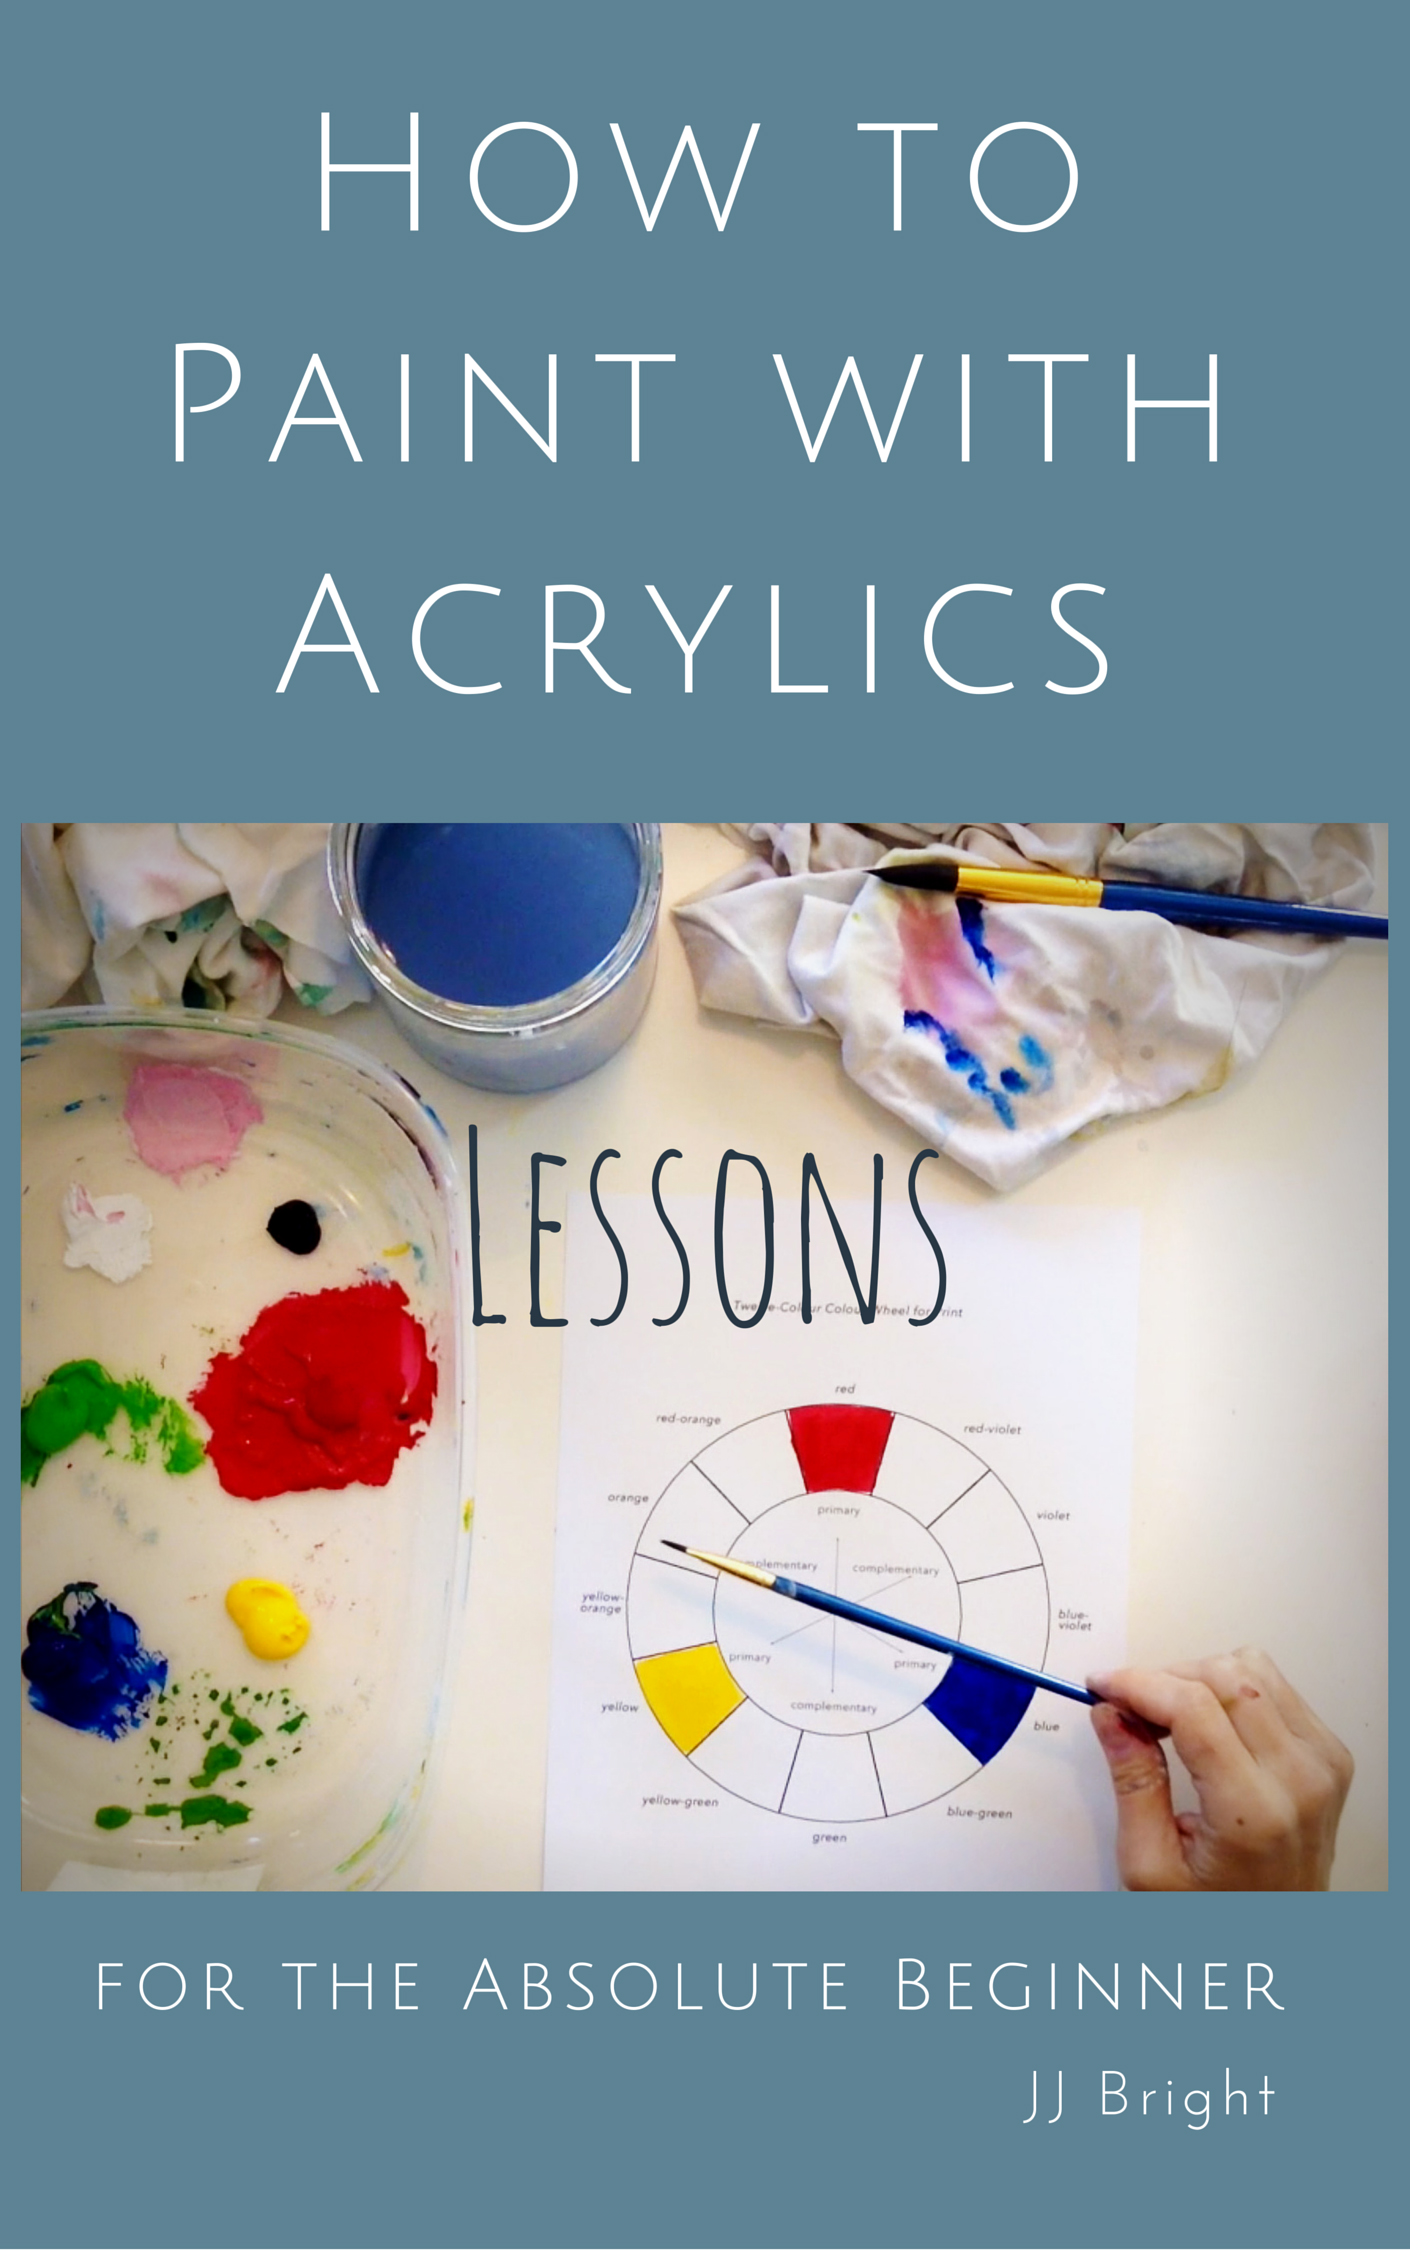 Be an Artist. How to Paint with Acrylics LESSONS for the Absolute Beginner